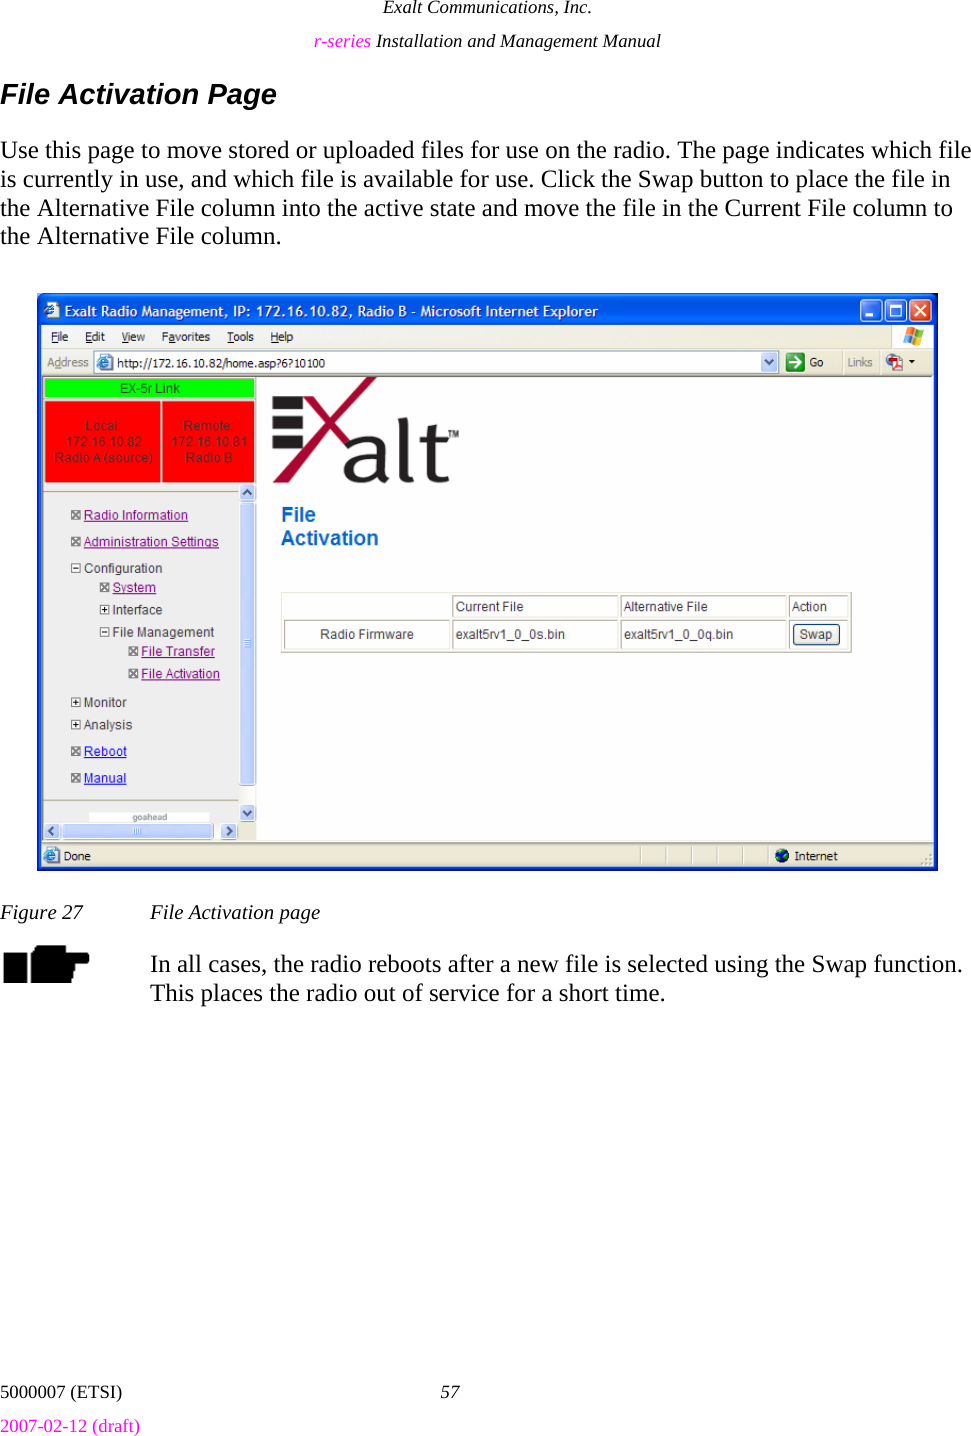 Exalt Communications, Inc. r-series Installation and Management Manual 5000007 (ETSI)  57 2007-02-12 (draft)  File Activation Page Use this page to move stored or uploaded files for use on the radio. The page indicates which file is currently in use, and which file is available for use. Click the Swap button to place the file in the Alternative File column into the active state and move the file in the Current File column to the Alternative File column. Figure 27  File Activation page In all cases, the radio reboots after a new file is selected using the Swap function. This places the radio out of service for a short time. 